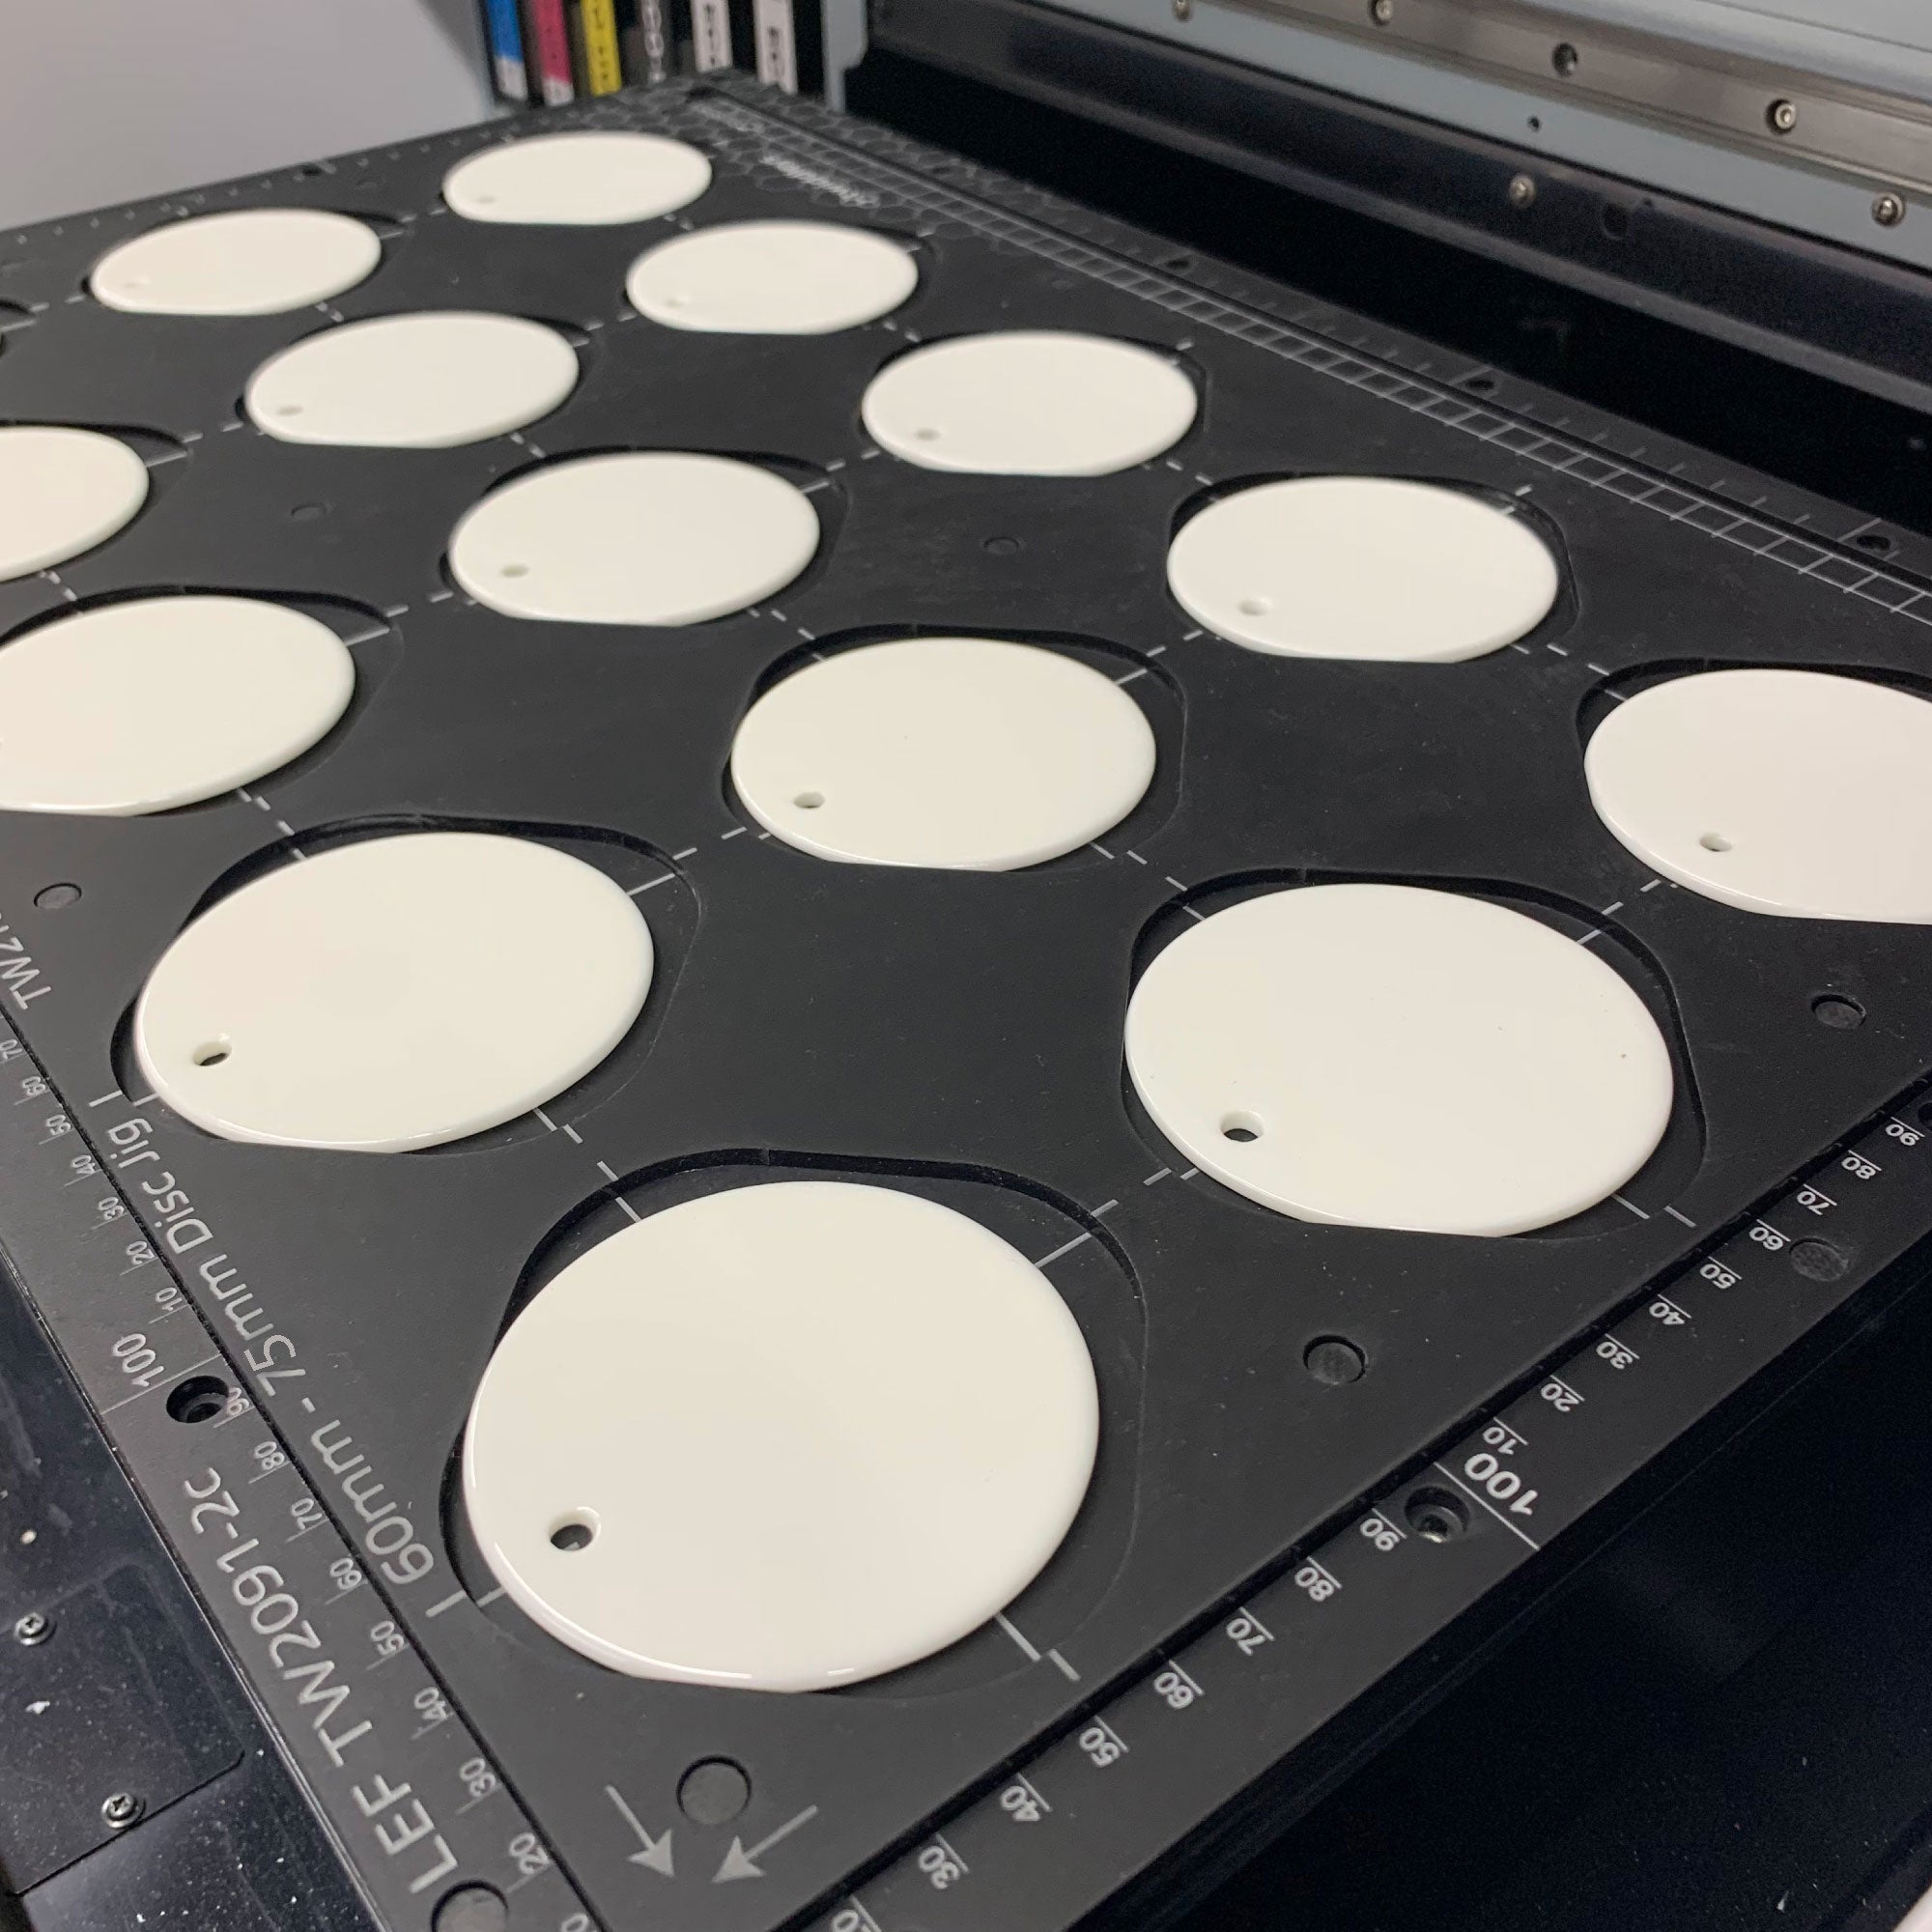 Ceramic Christmas Bauble Printing Jig for Roland BD-8 Flatbed Printer Series: 60mm - 77mm Circular Discs (2 Spaces)